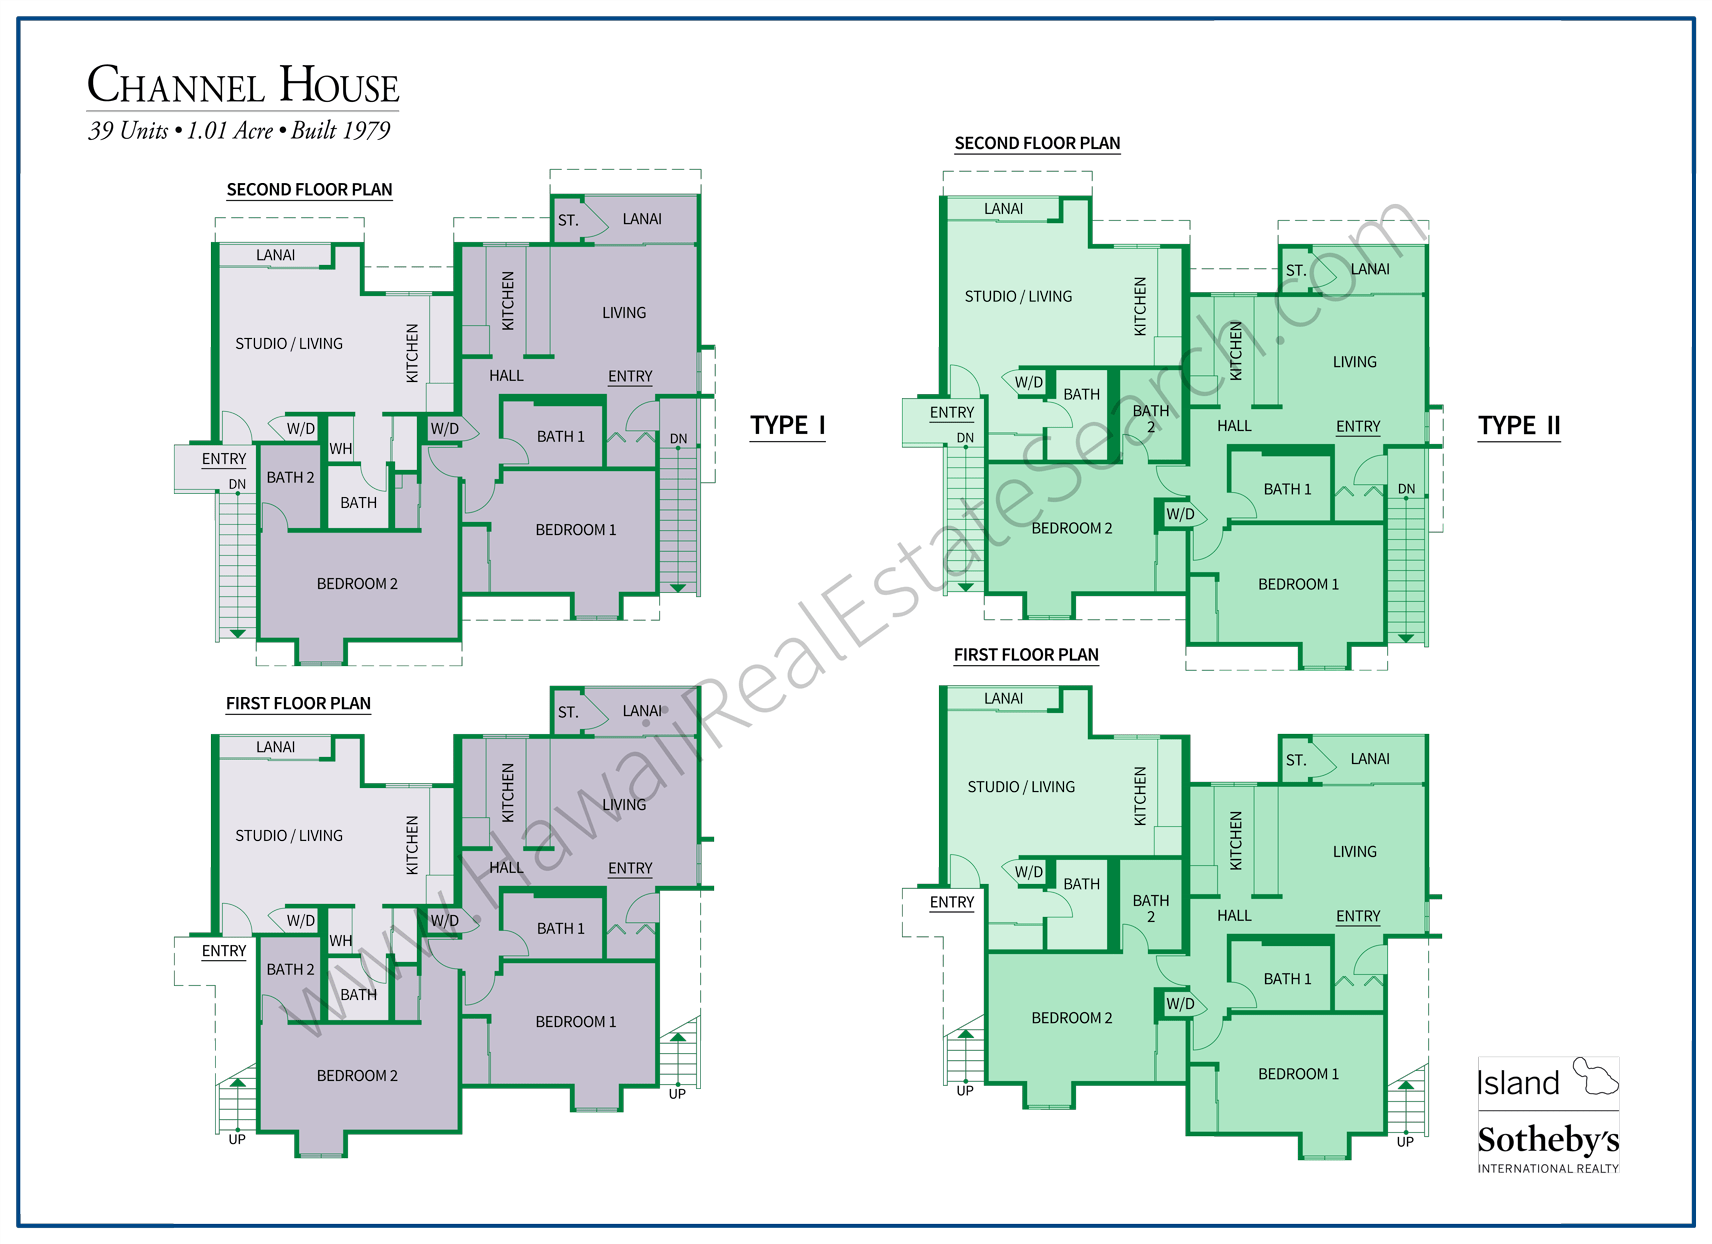 Channel House floor plans